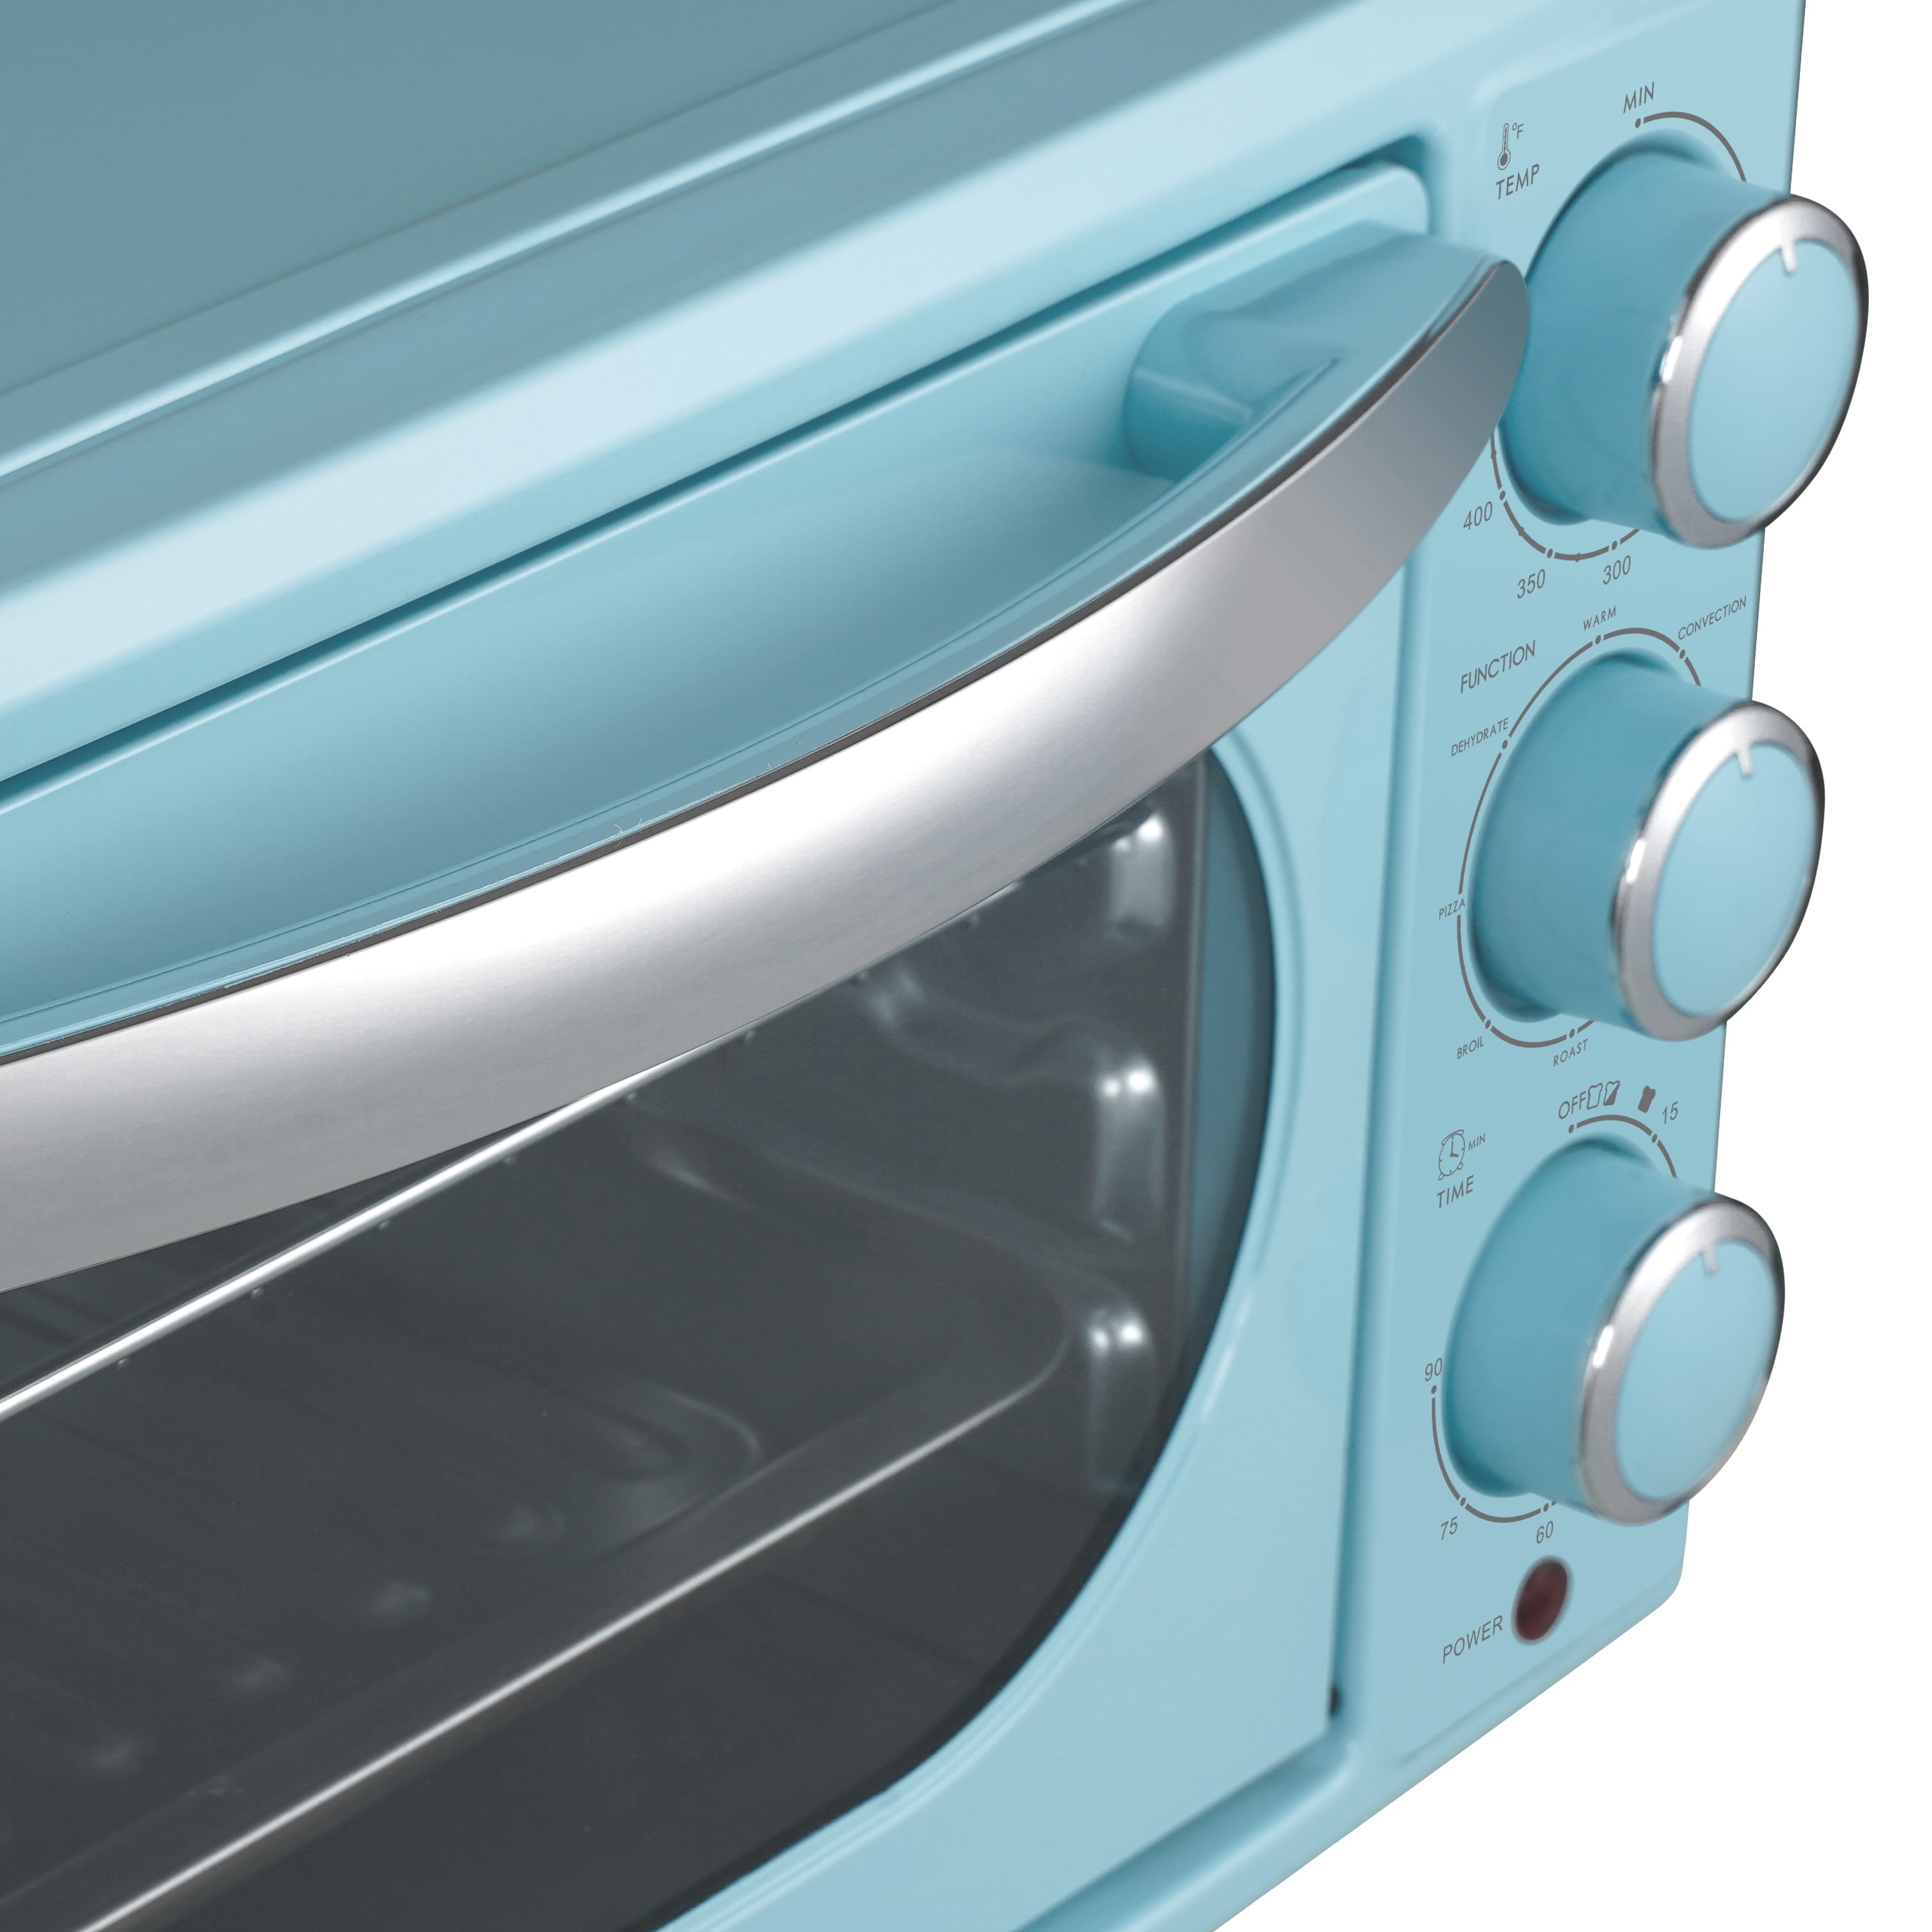 Galanz Retro French door 7-Slice Blue Convection Toaster Oven with  Rotisserie (1800-Watt)